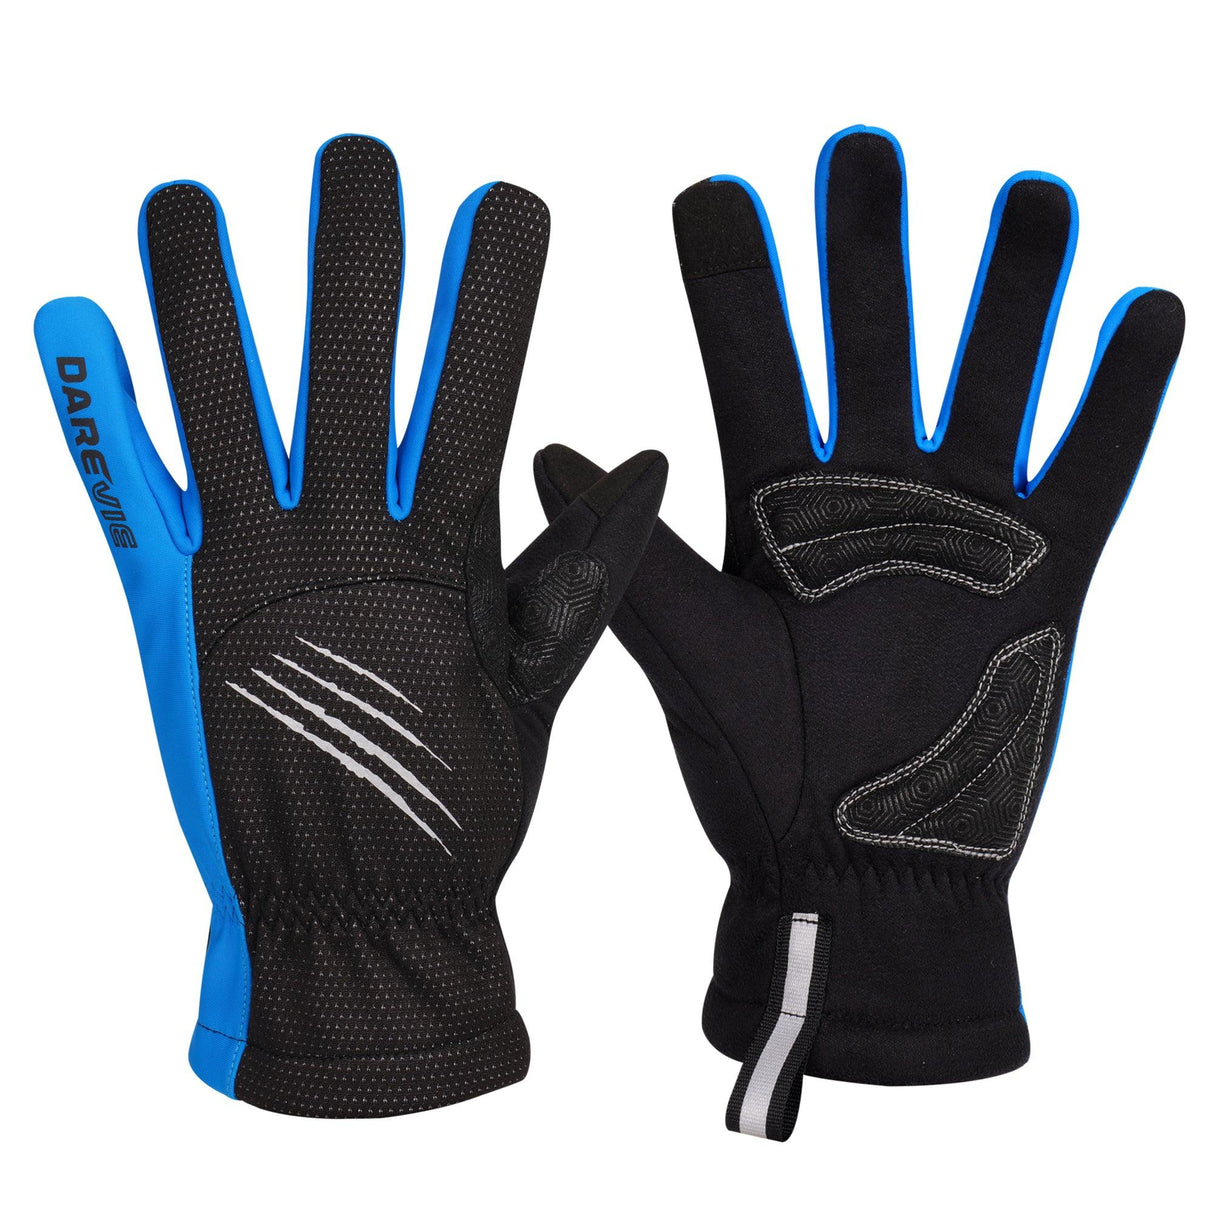 GRIPSPRINT THERMAL FULL FINGER CYCLING GLOVES-Blue-Darevie Shop